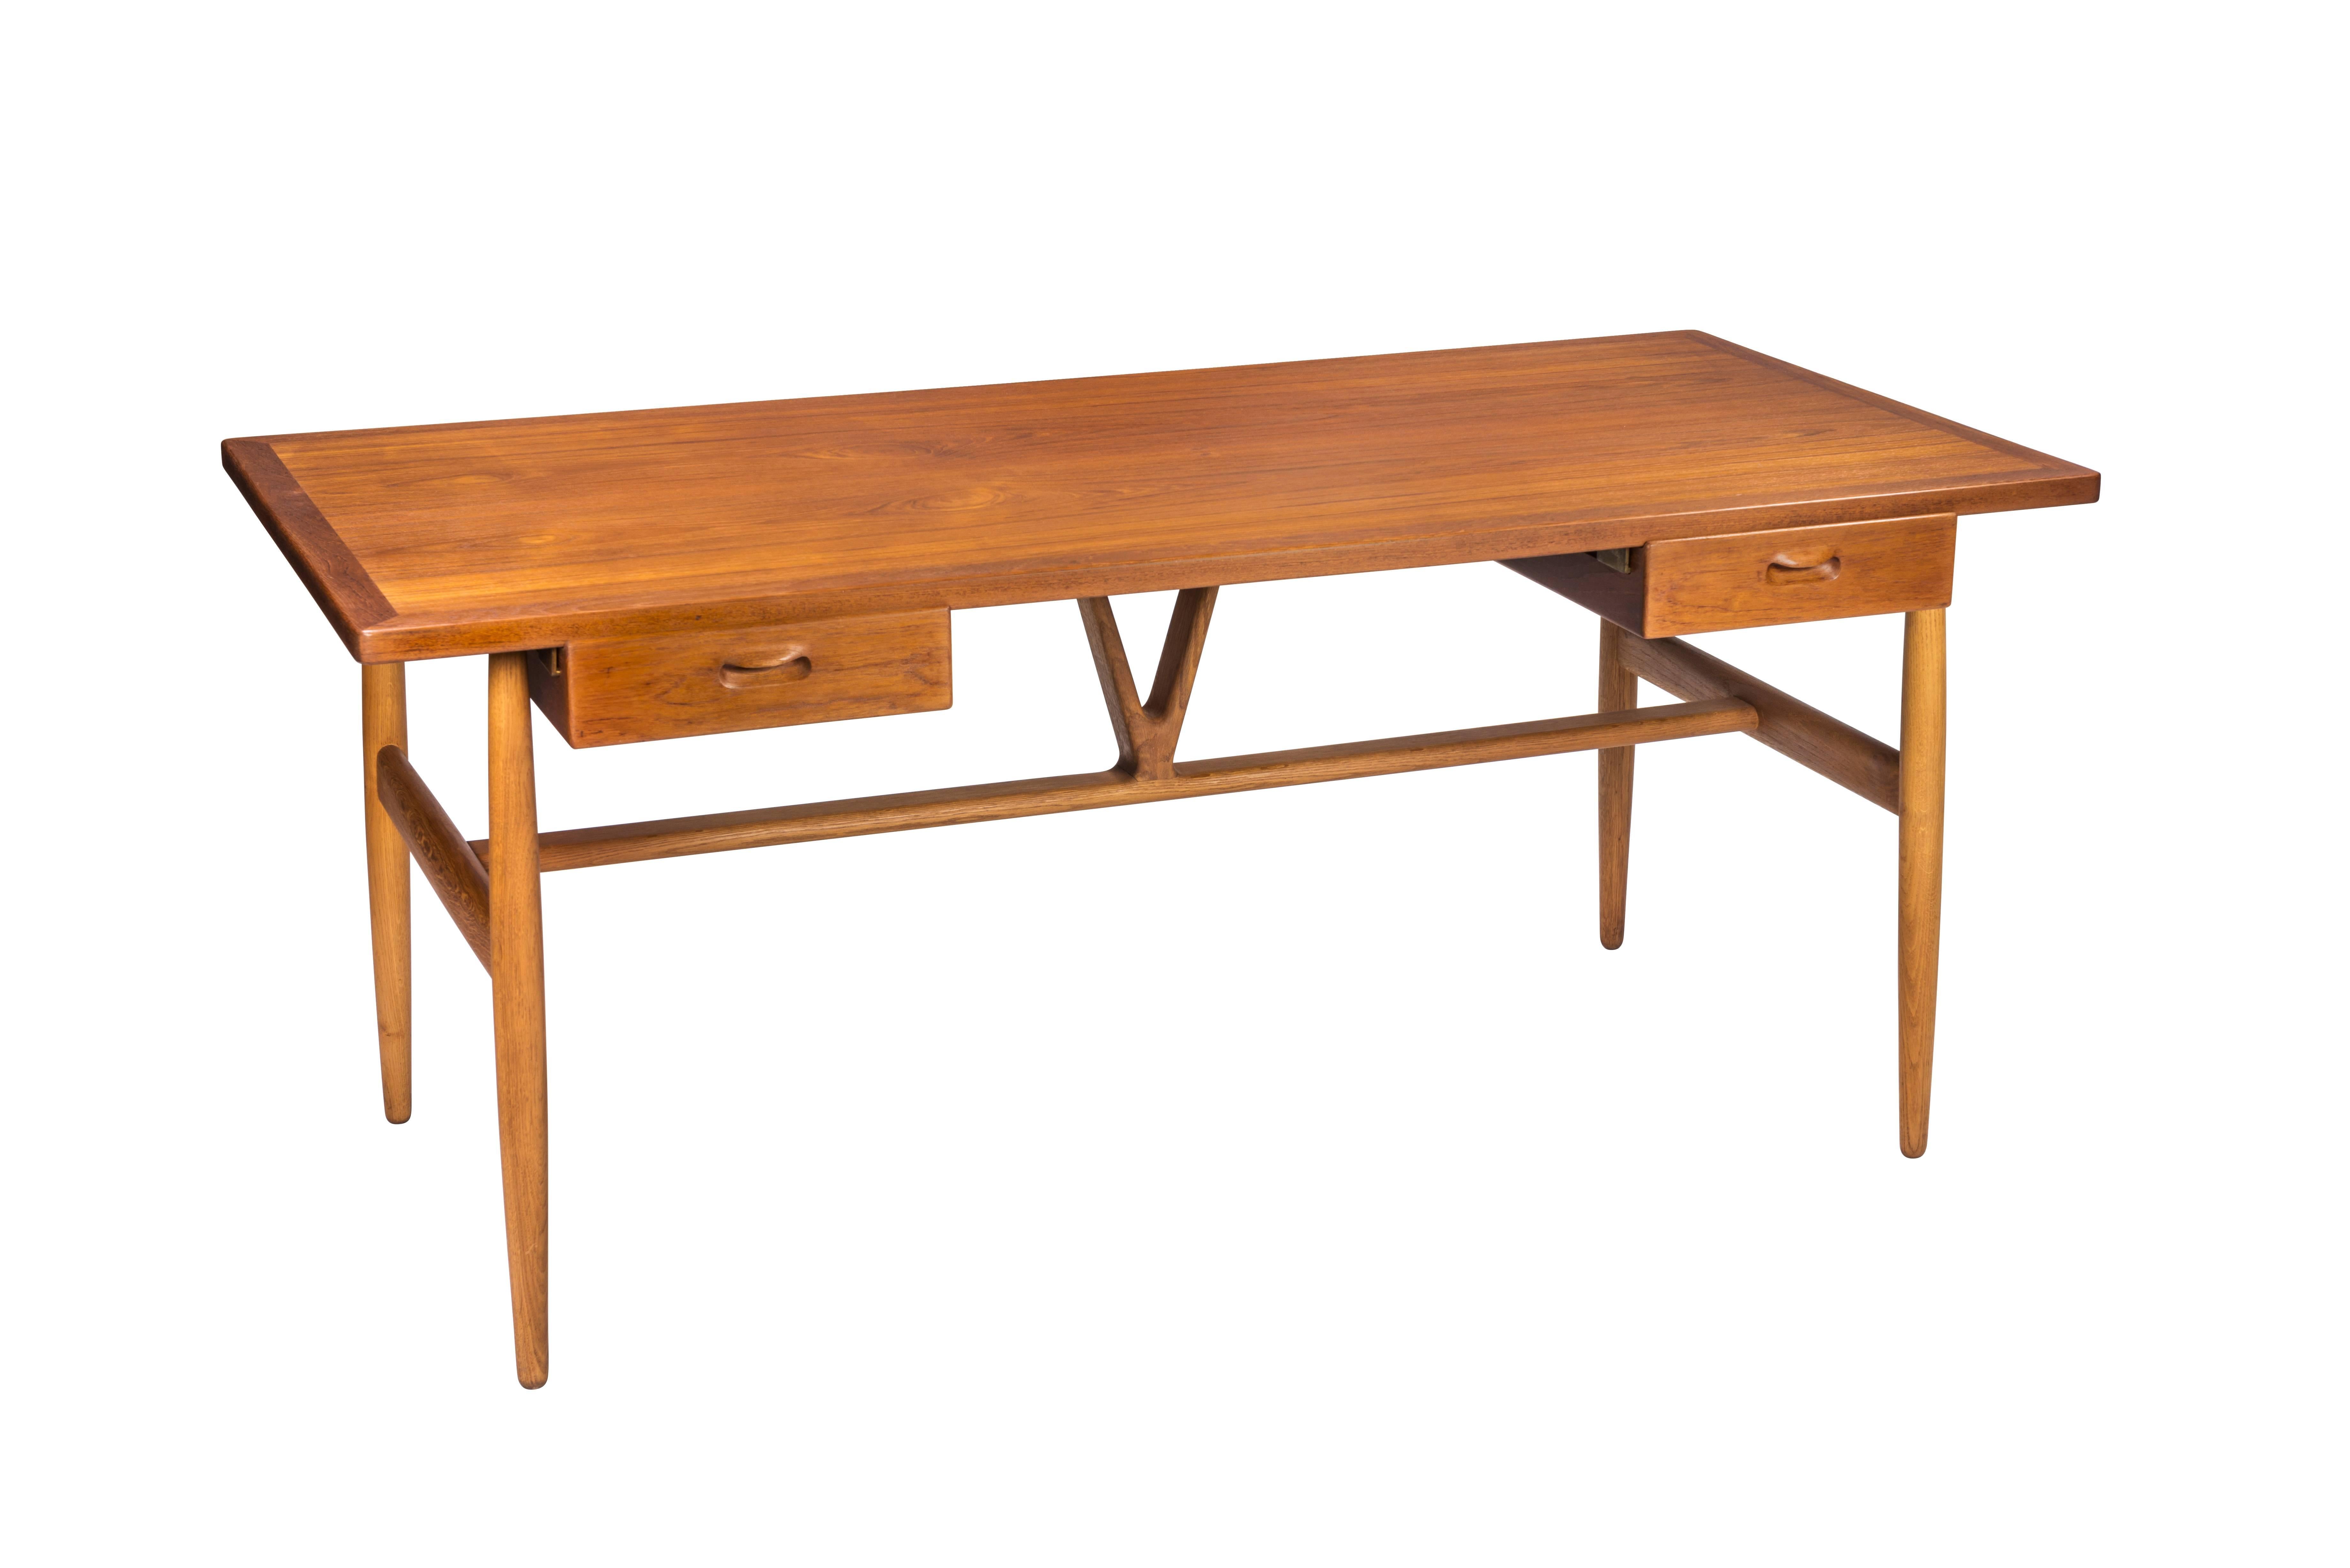 A rare and nicely designed and detailed writing desk having a teak top over two floating drawers on turned oak dowel legs braced by a hand-carved central wishbone-shaped strut. Iconic Danish design. Signed.